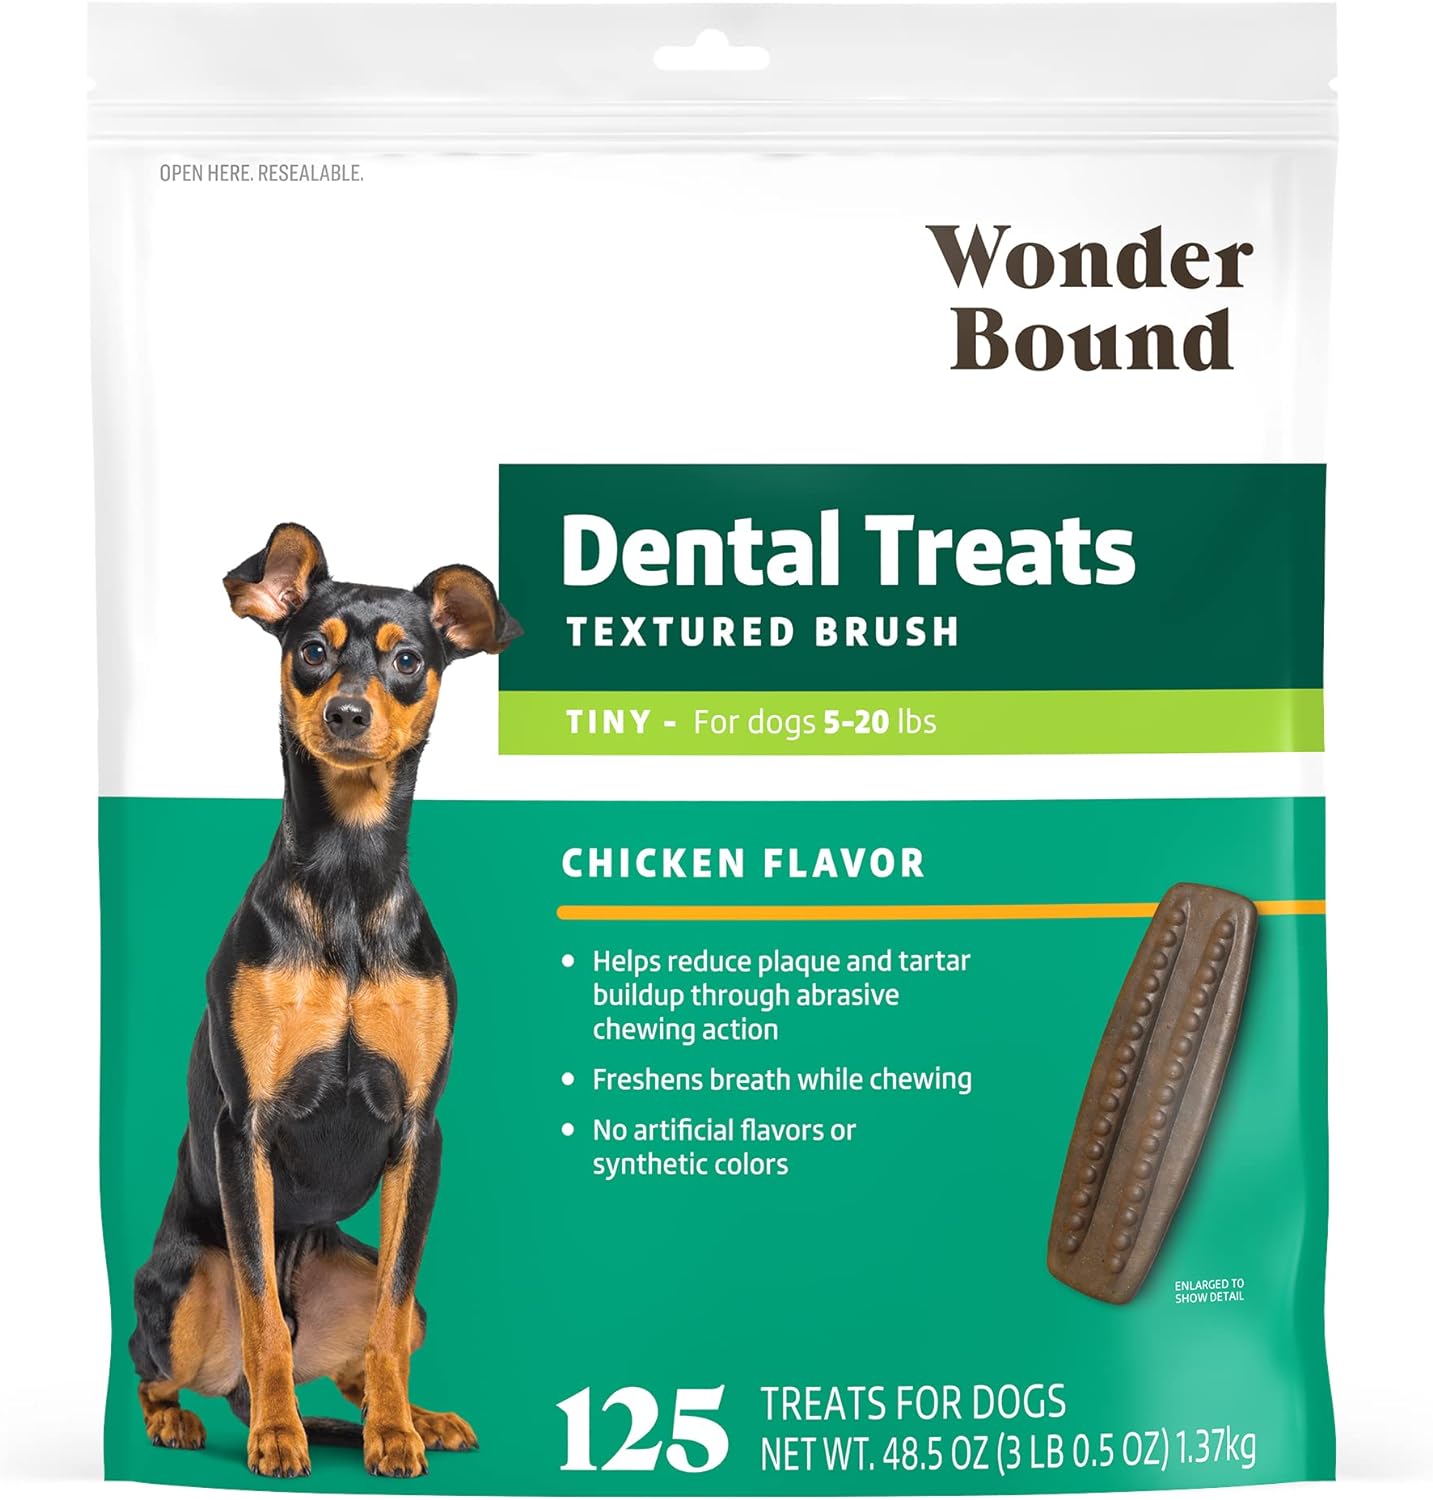 Amazon Brand - Wonder Bound Dog Dental Treats for Tiny Dogs (5-15 lbs), Real Chicken Flavor, Nubbed Texture for Plaque & Tartar Control, Freshens Breath While Chewing, 125 Count